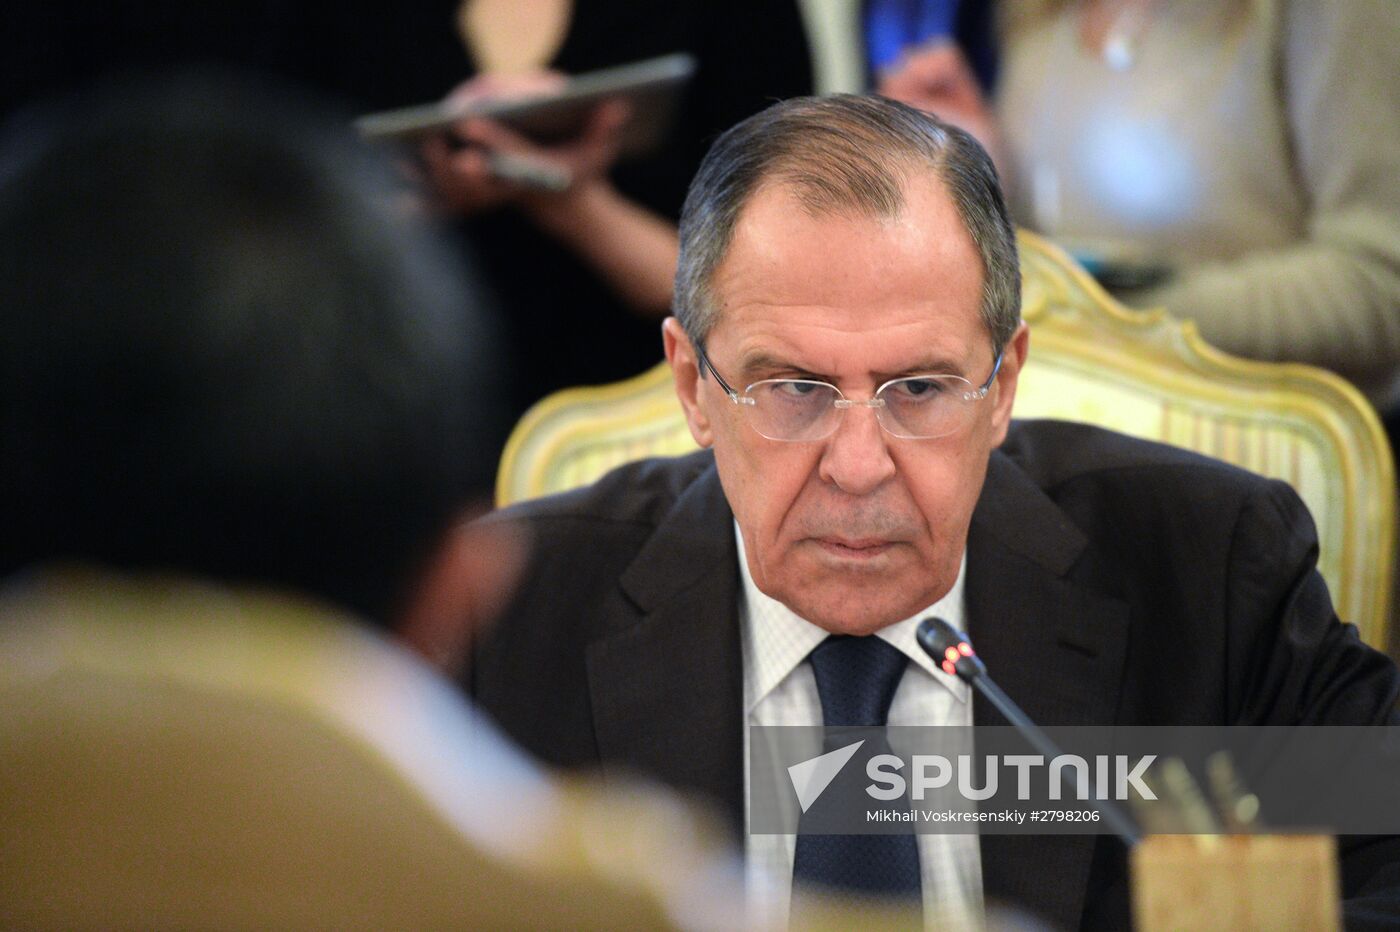 Foreign Minister Sergei Lavrov attends the third session of the Russian-Arab Cooperation Forum